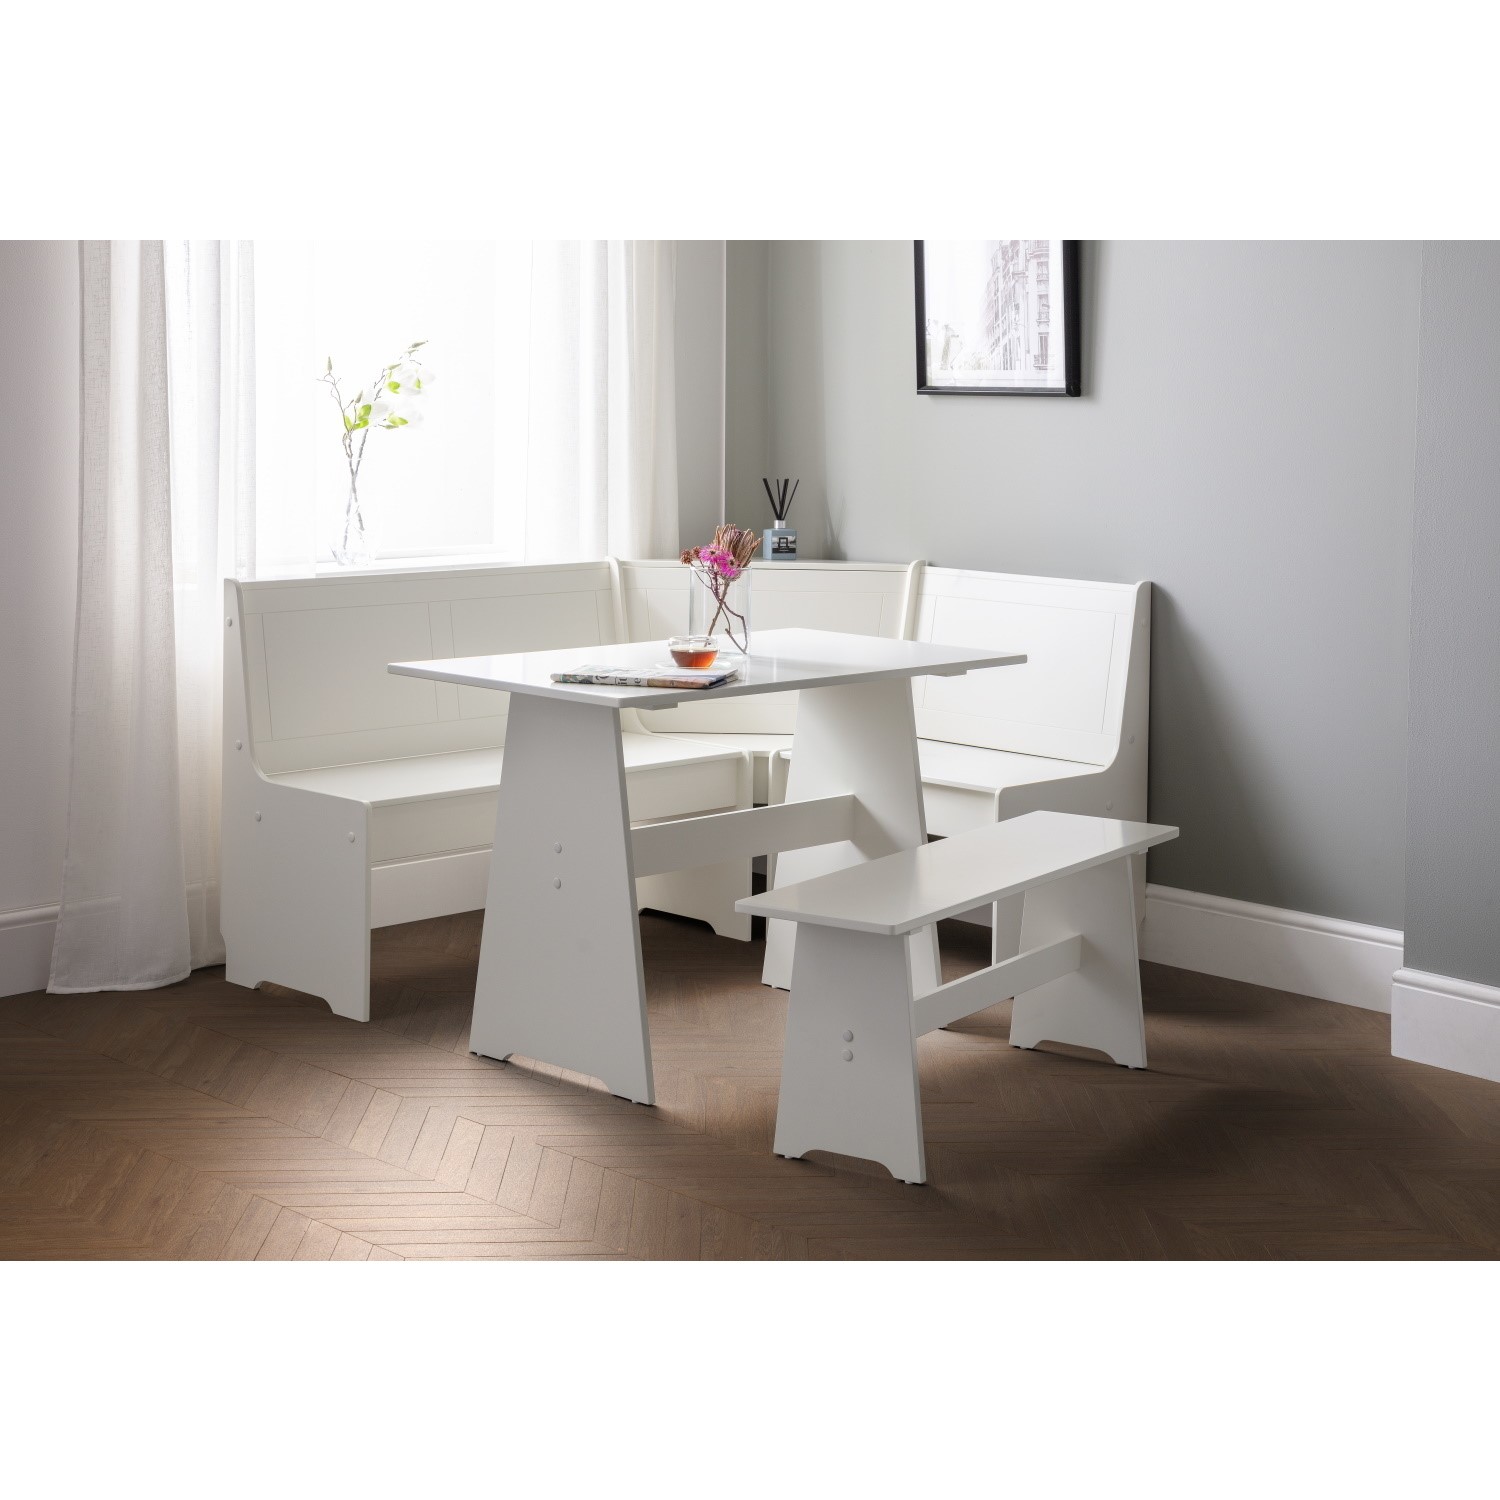 Read more about White corner dining set with a matching bench newport